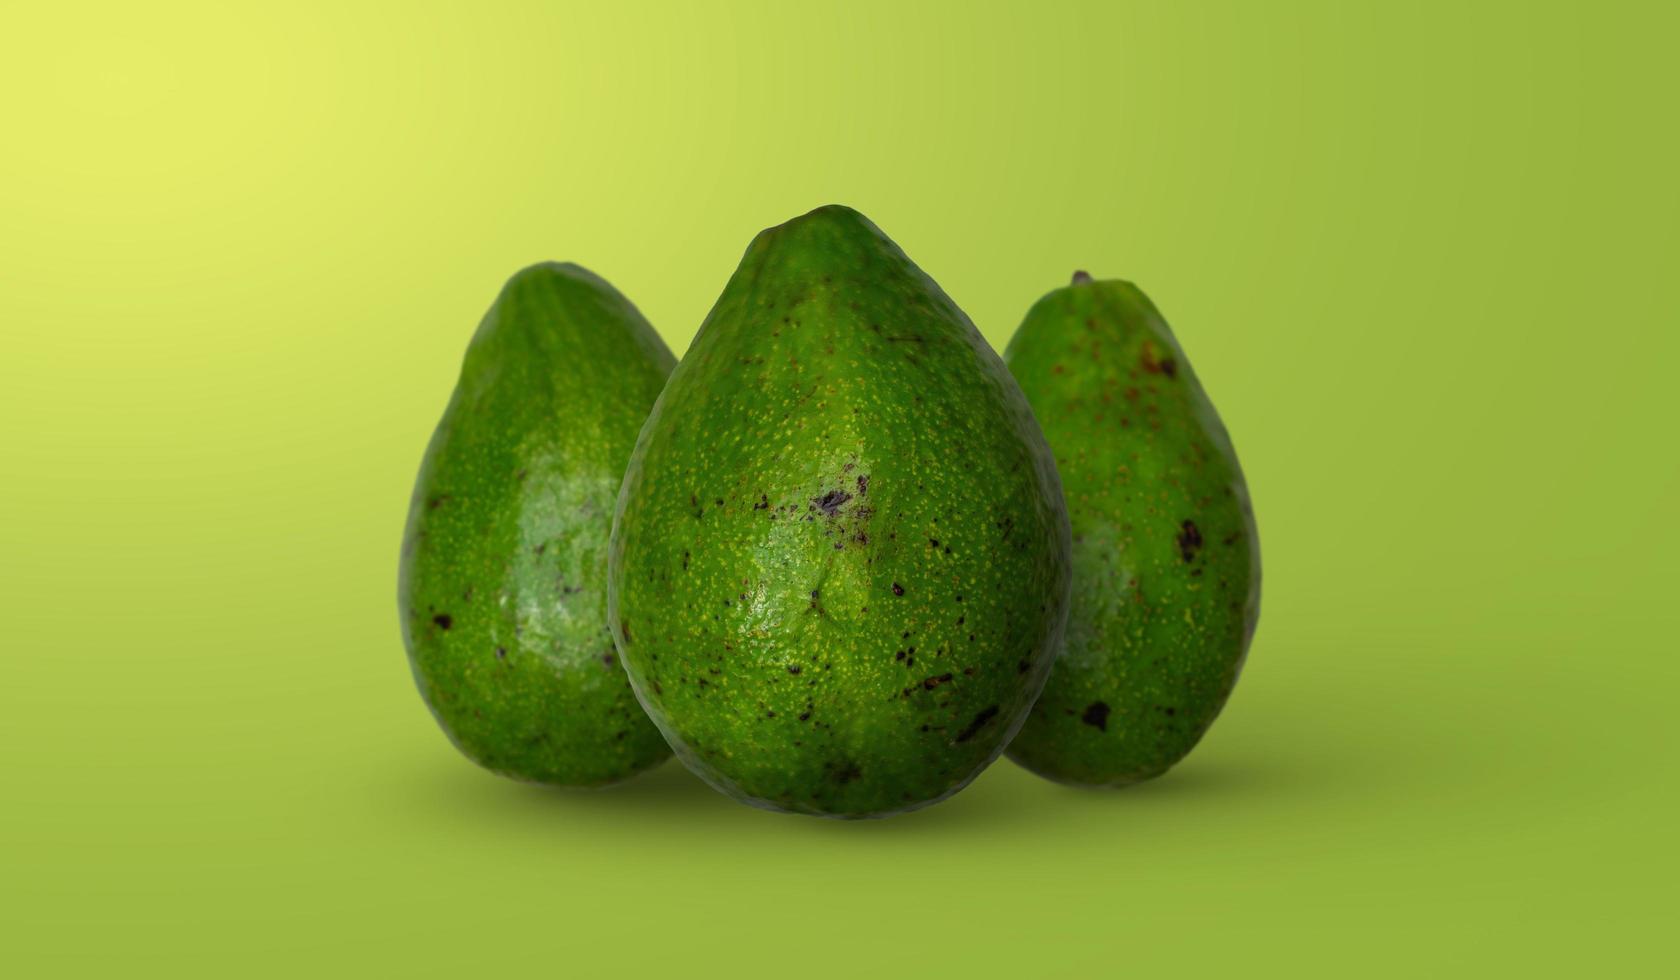 Avocado composition for background design. an object photography of green tropical fruit. photo